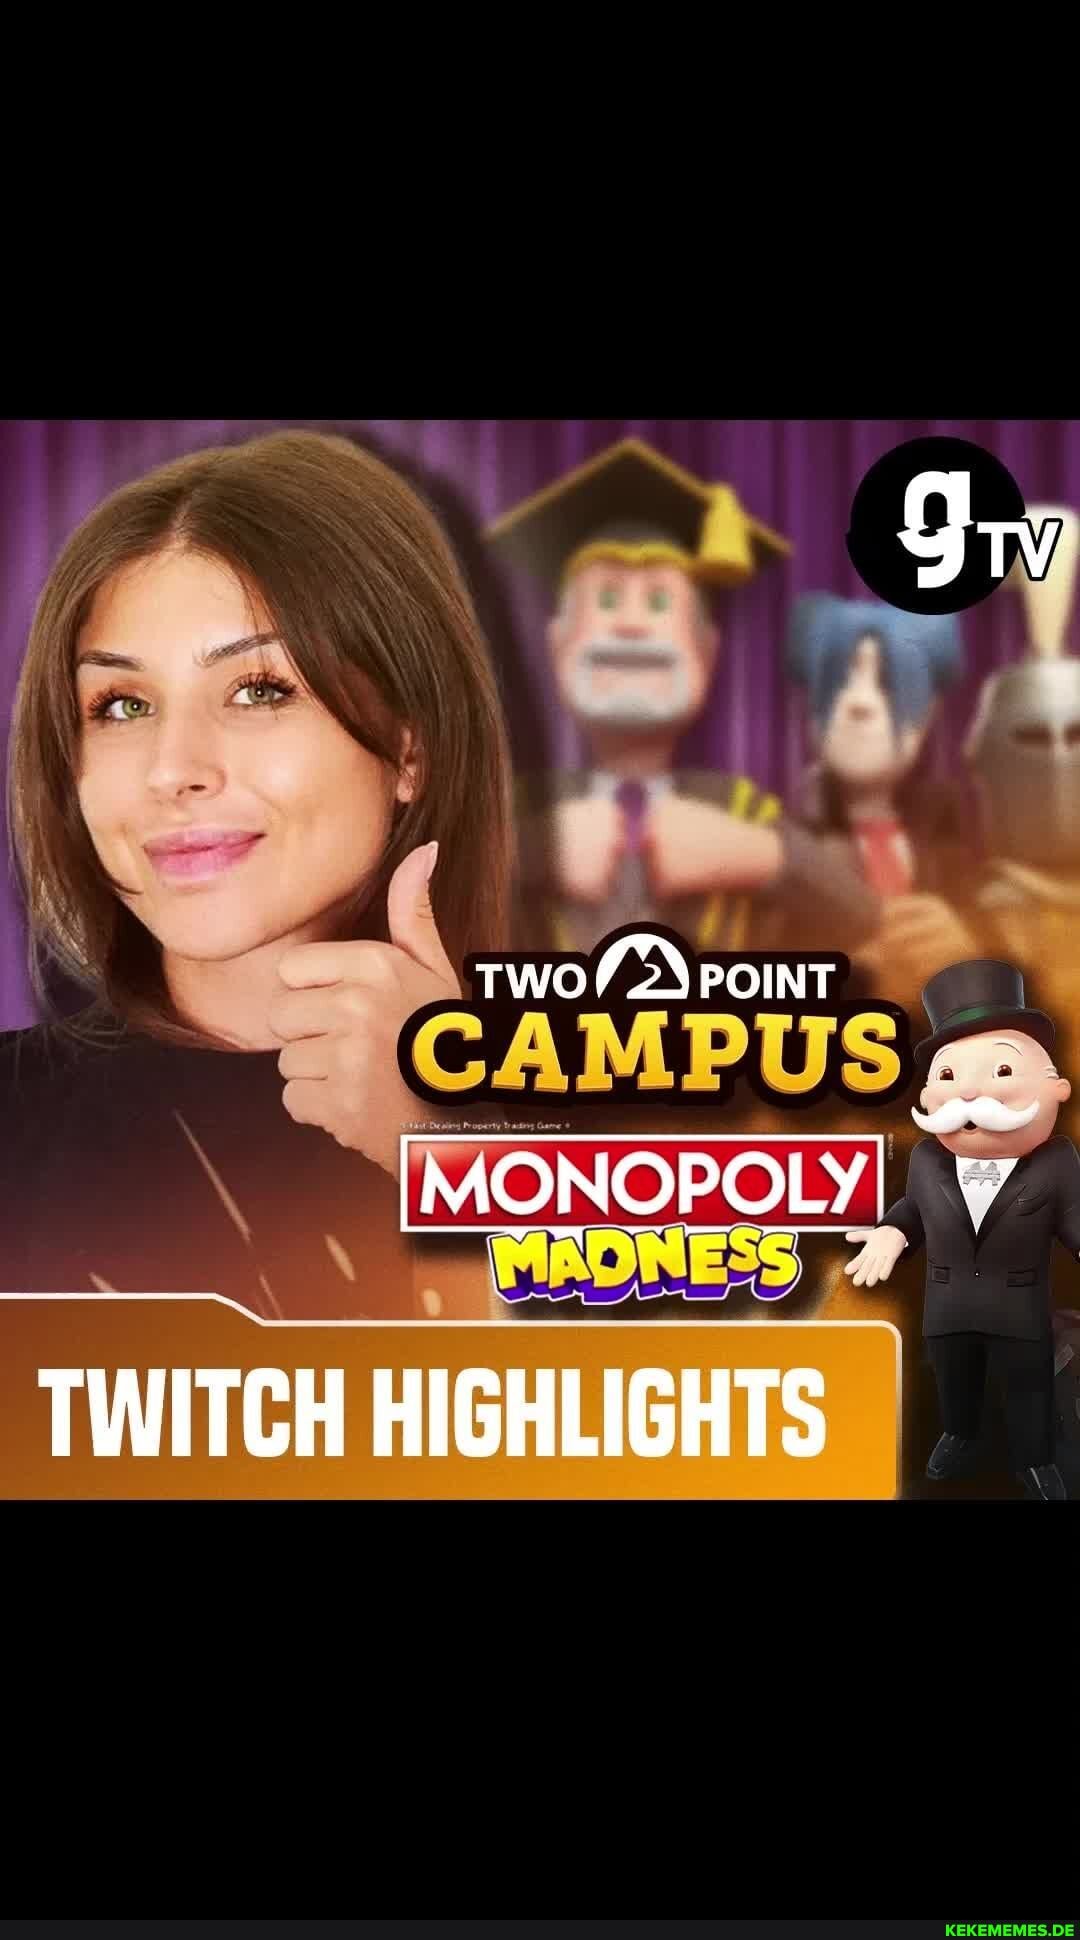 POINT [MONOPOLY] TWITCH HIGHLIGHTS